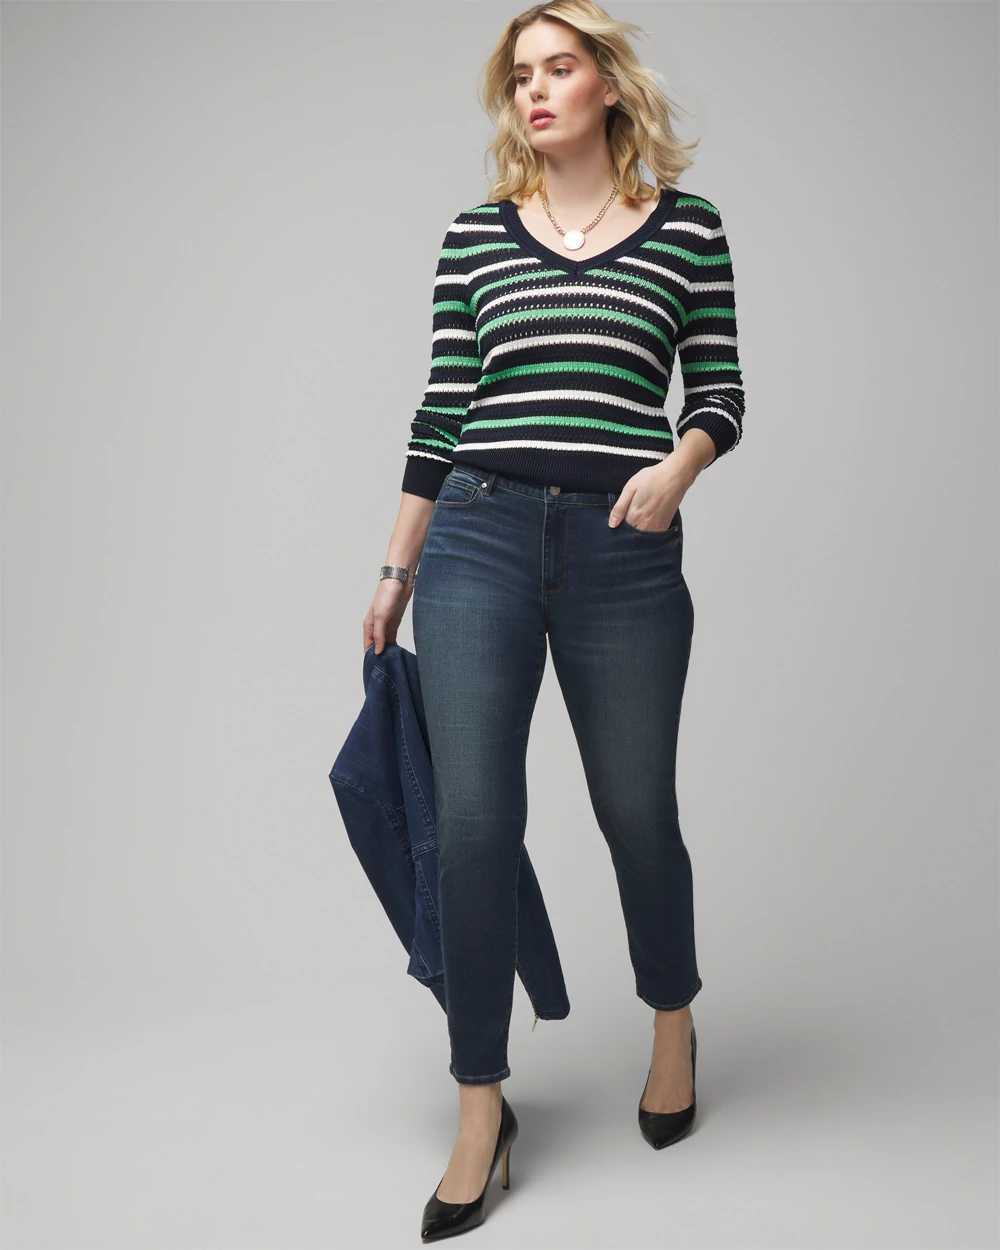 Curvy Mid-Rise Everyday Soft Denim  Slim Jeans click to view larger image.